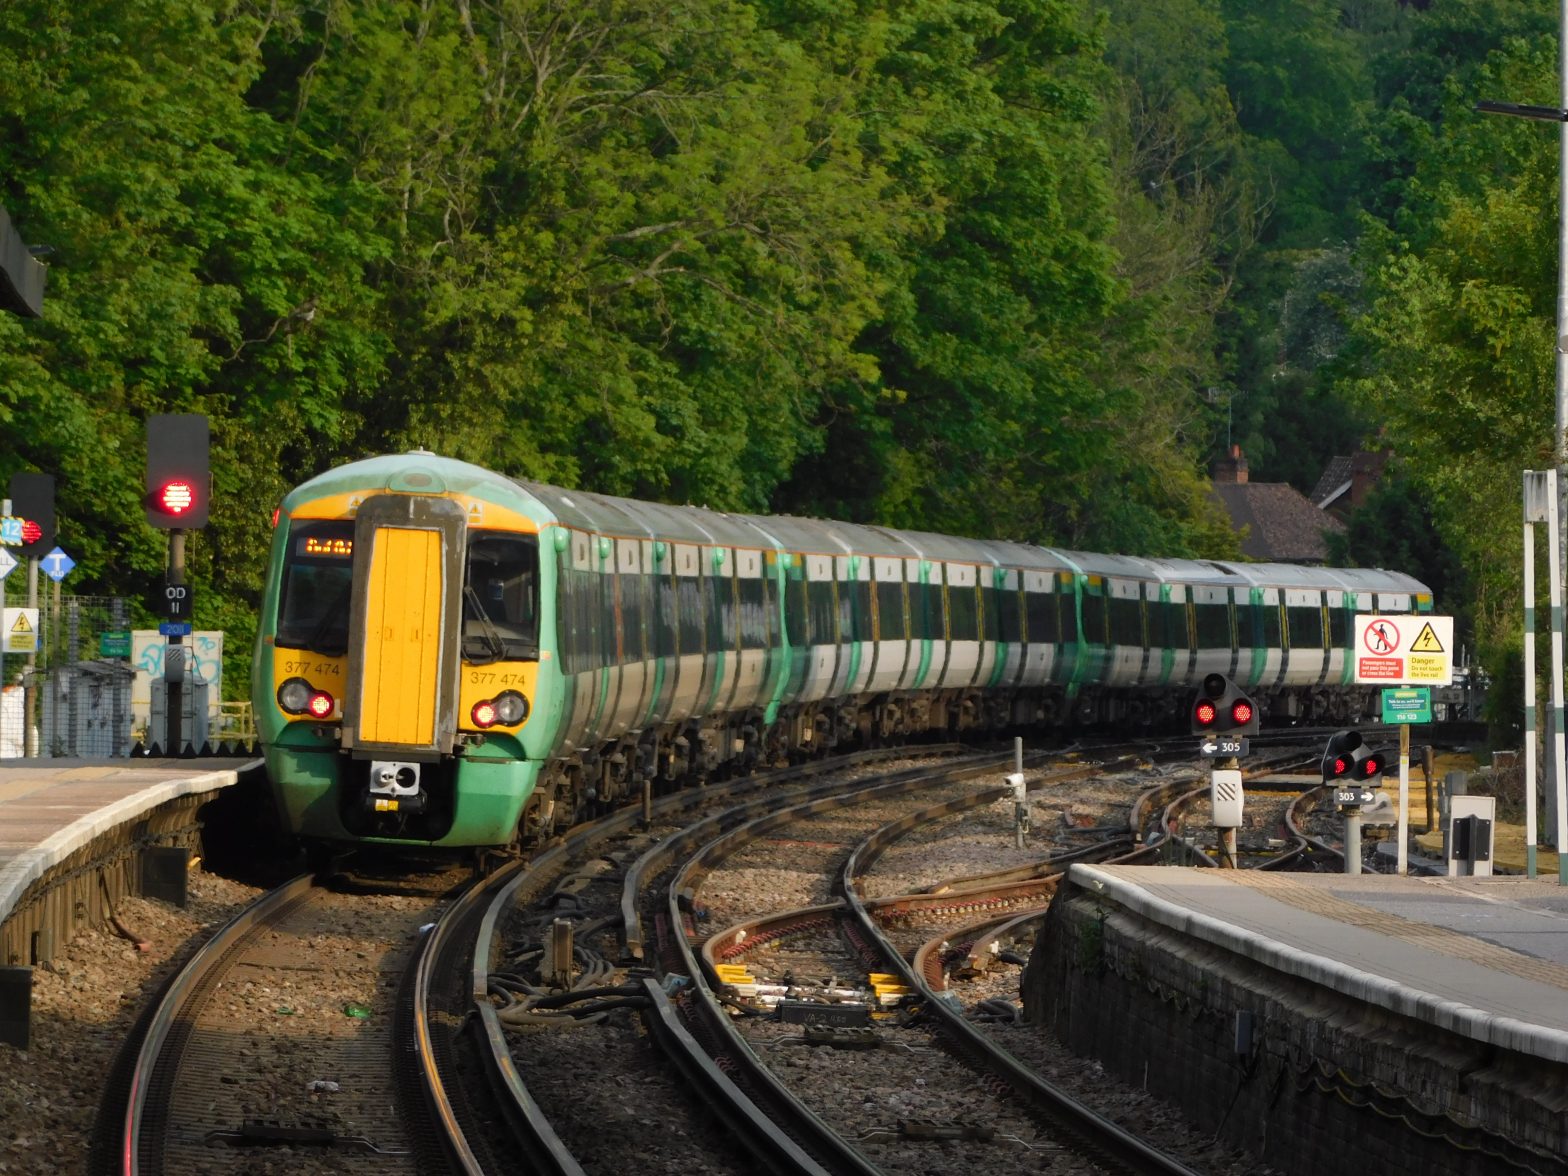 southern train used to illustrate june timetable change